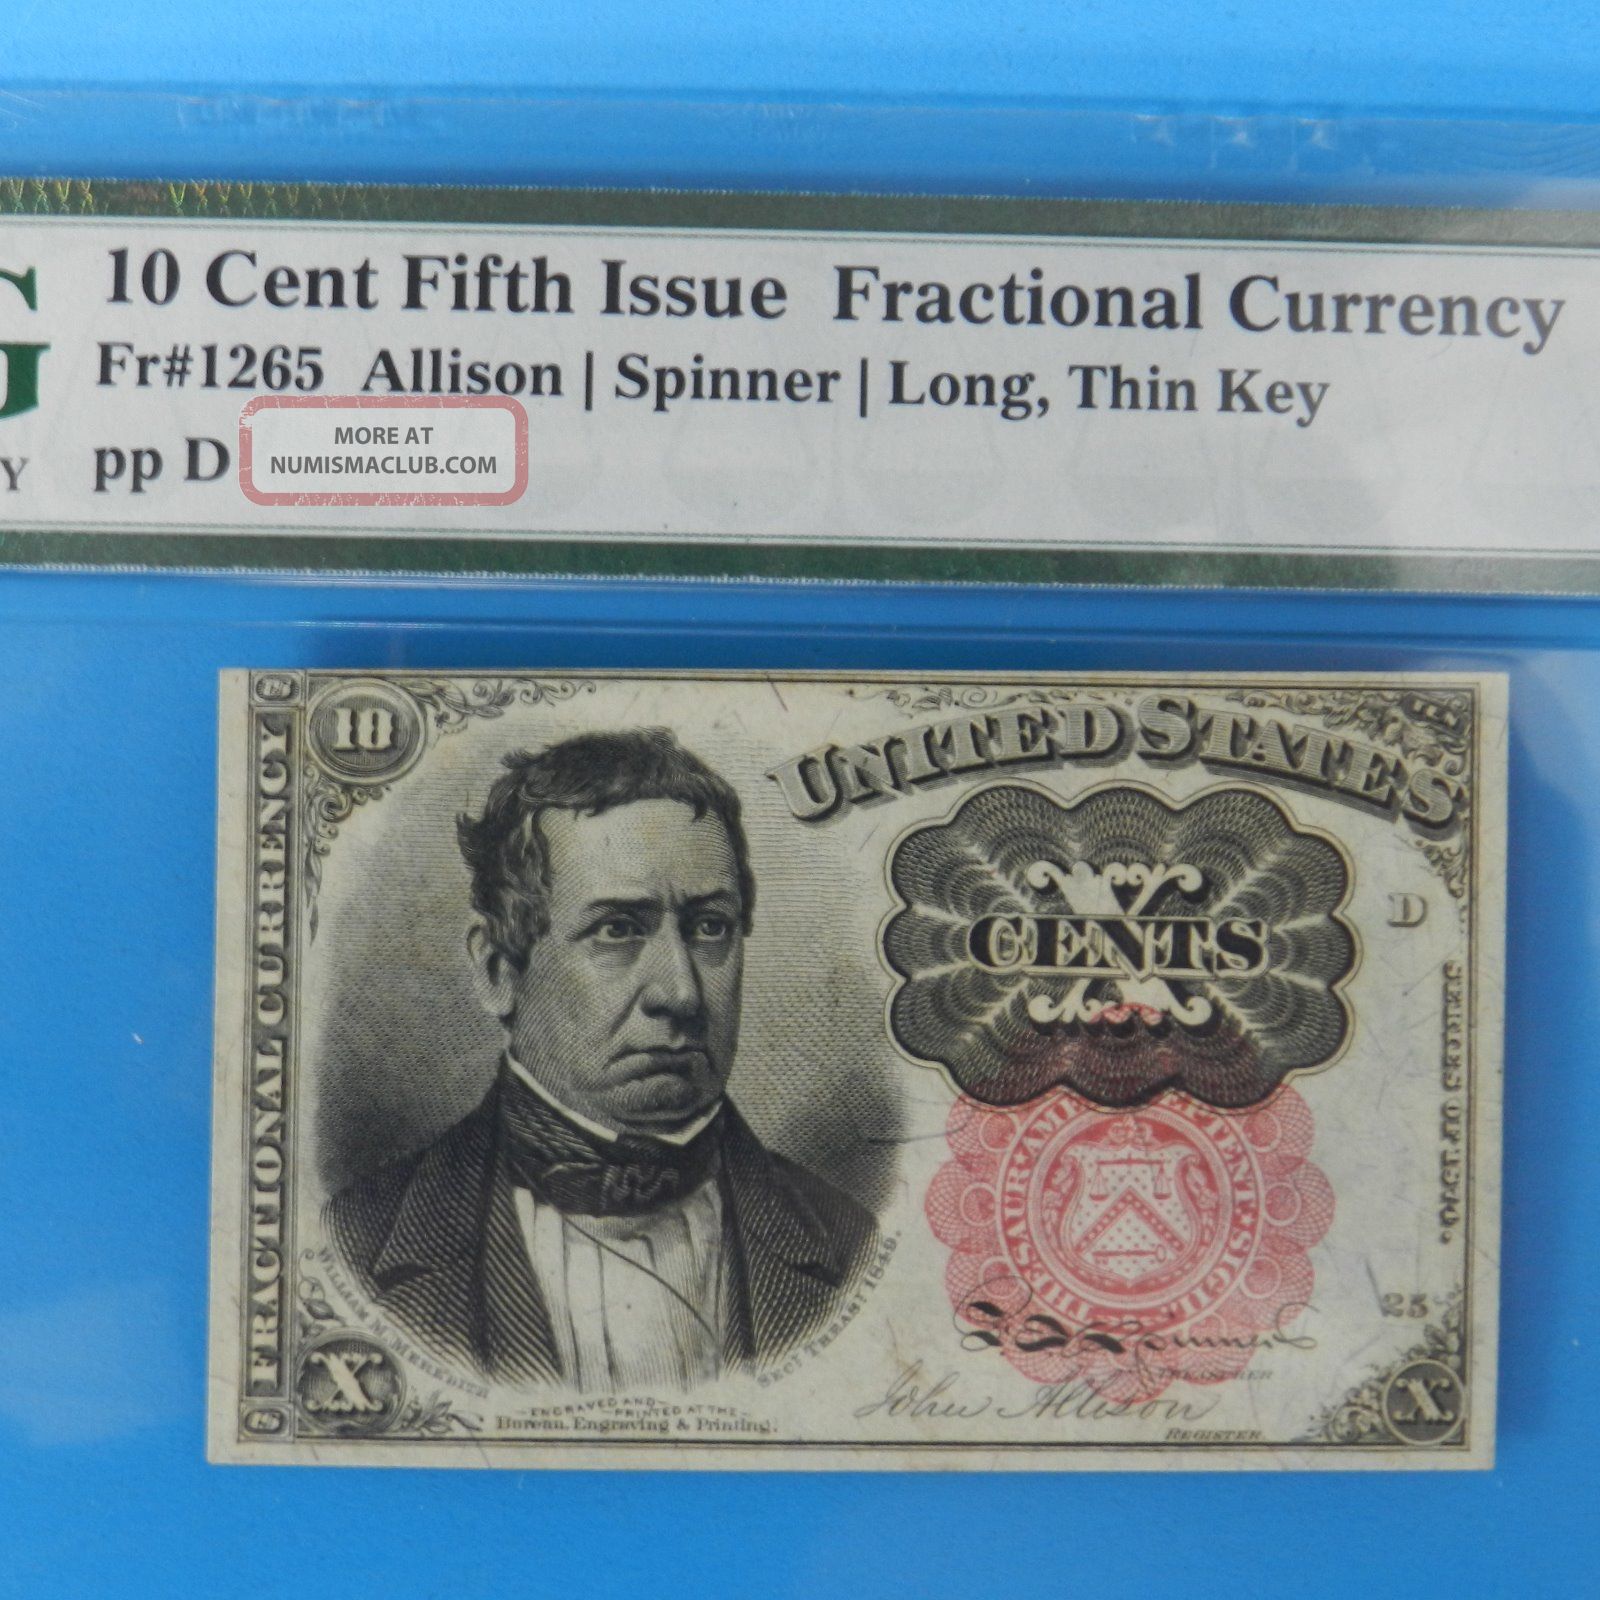 10 Cent Fifth Issue Fractional Currency Pmg 63 Epq Choice Unc Fr 1265